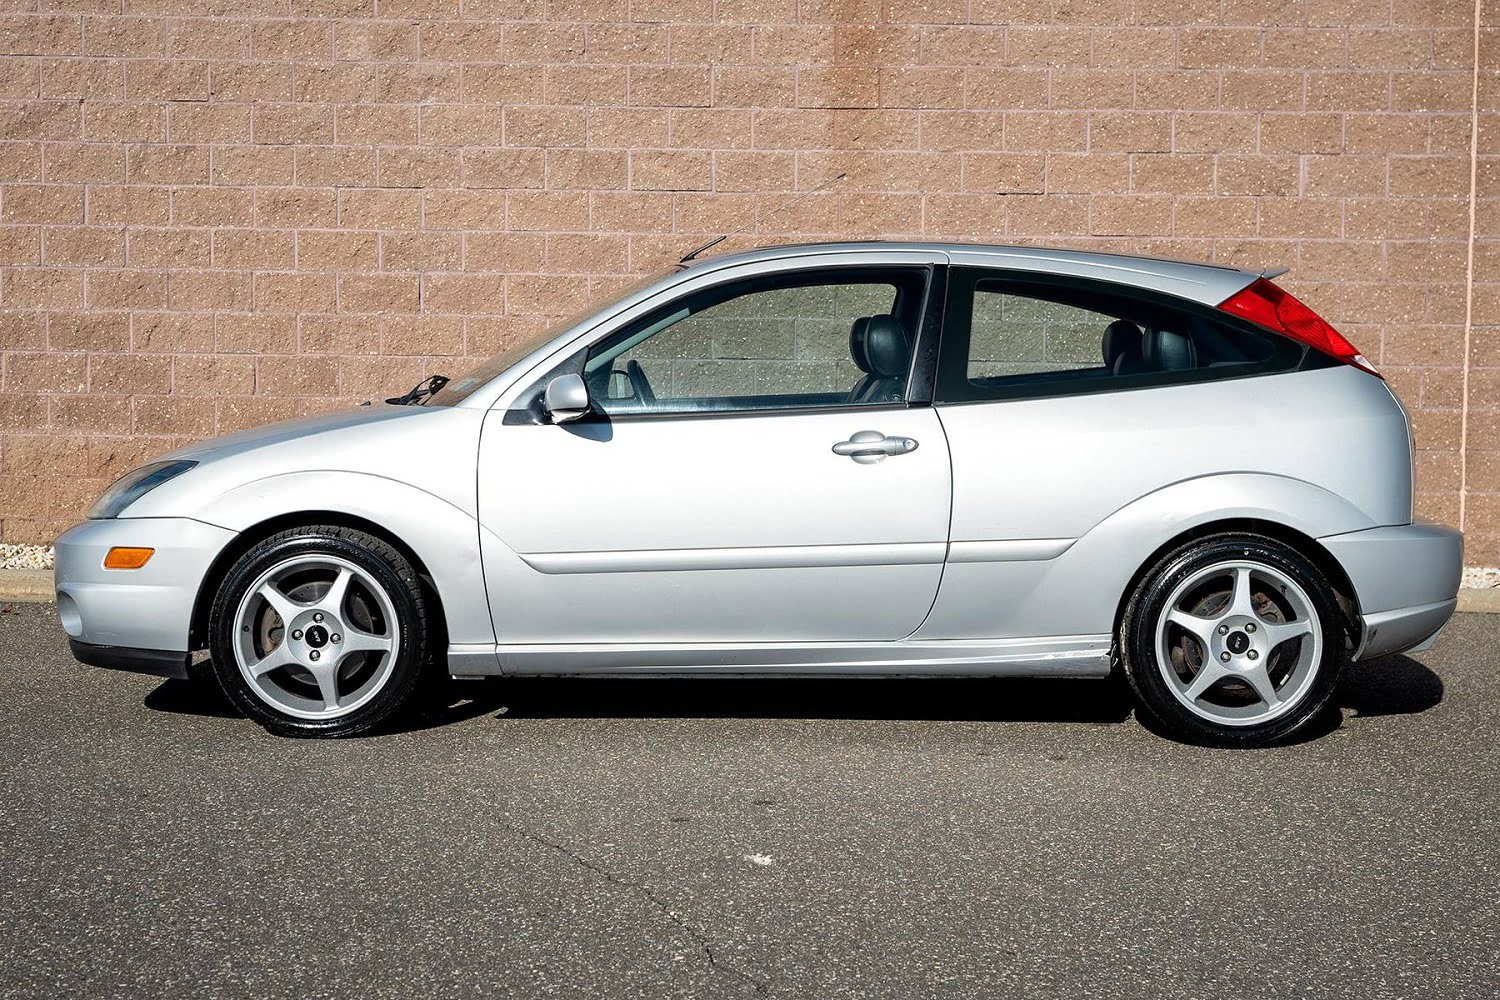 This 2002 Ford Focus SVT Is An Improbable Bone-Stock Survivor